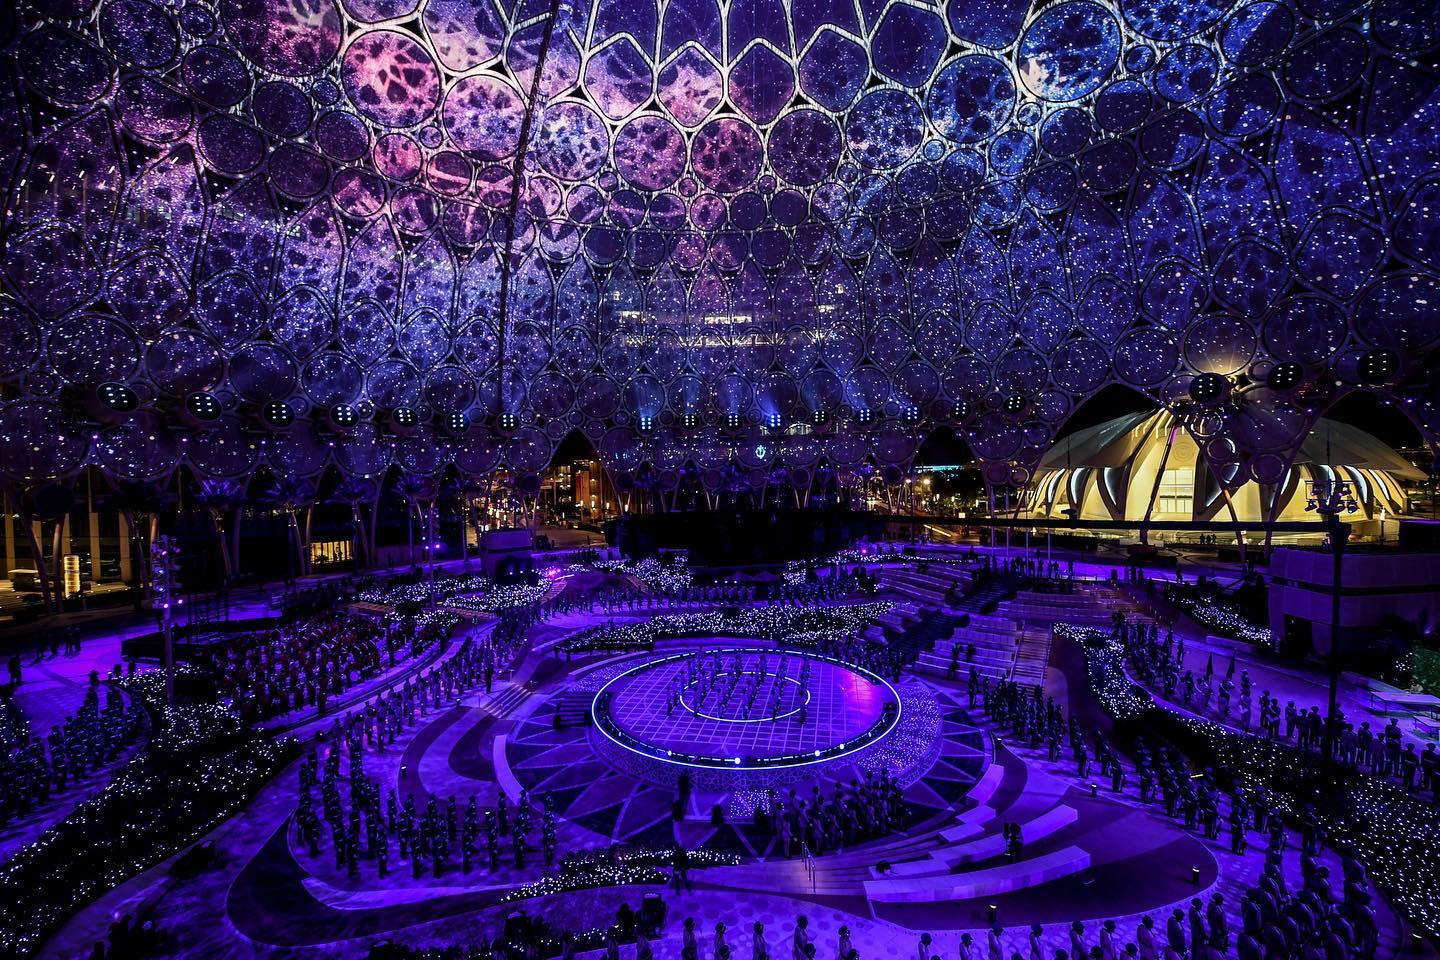 Formations of performers are under a large, glittering dome with intricate geometric patterns.